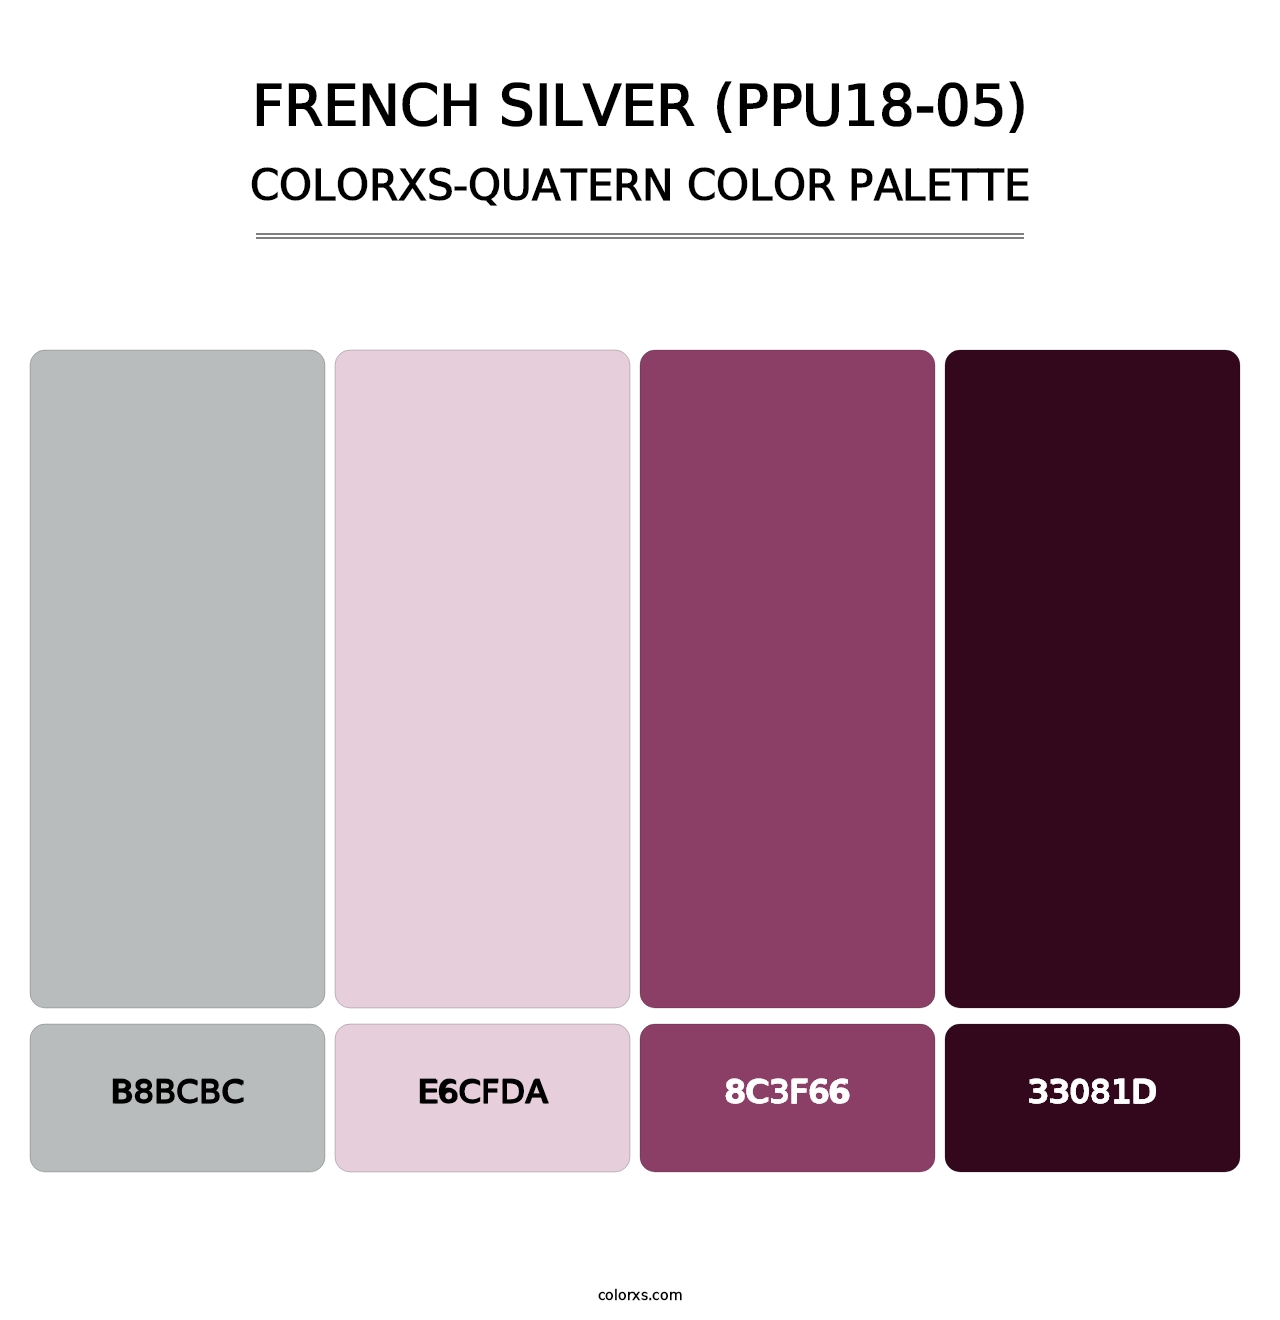 French Silver (PPU18-05) - Colorxs Quatern Palette